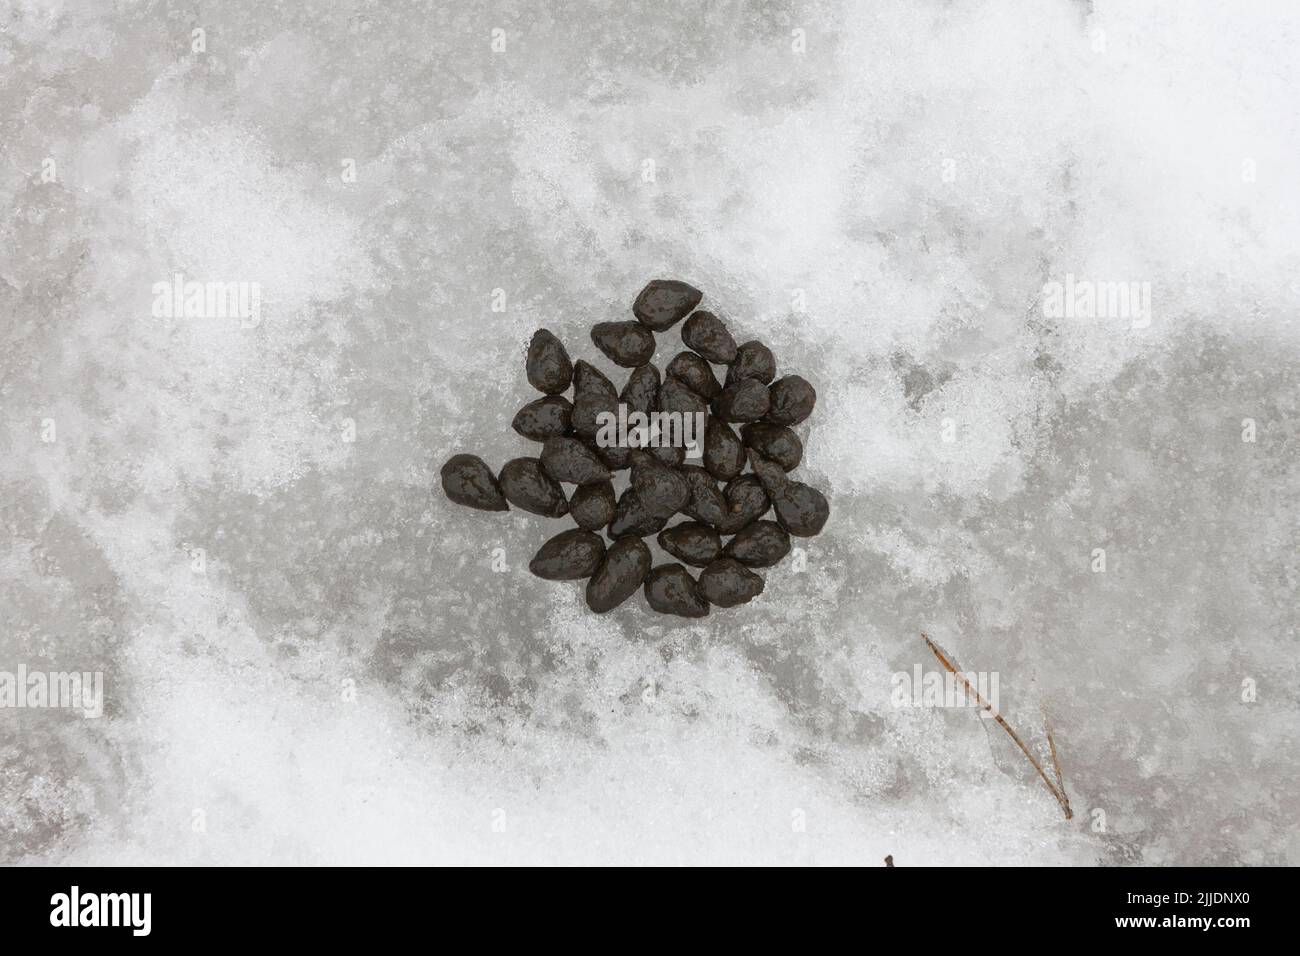 Roe deer Capreolus capreolus, droppings in snow, Moore Nature Reserve, Cheshire, UK, January Stock Photo